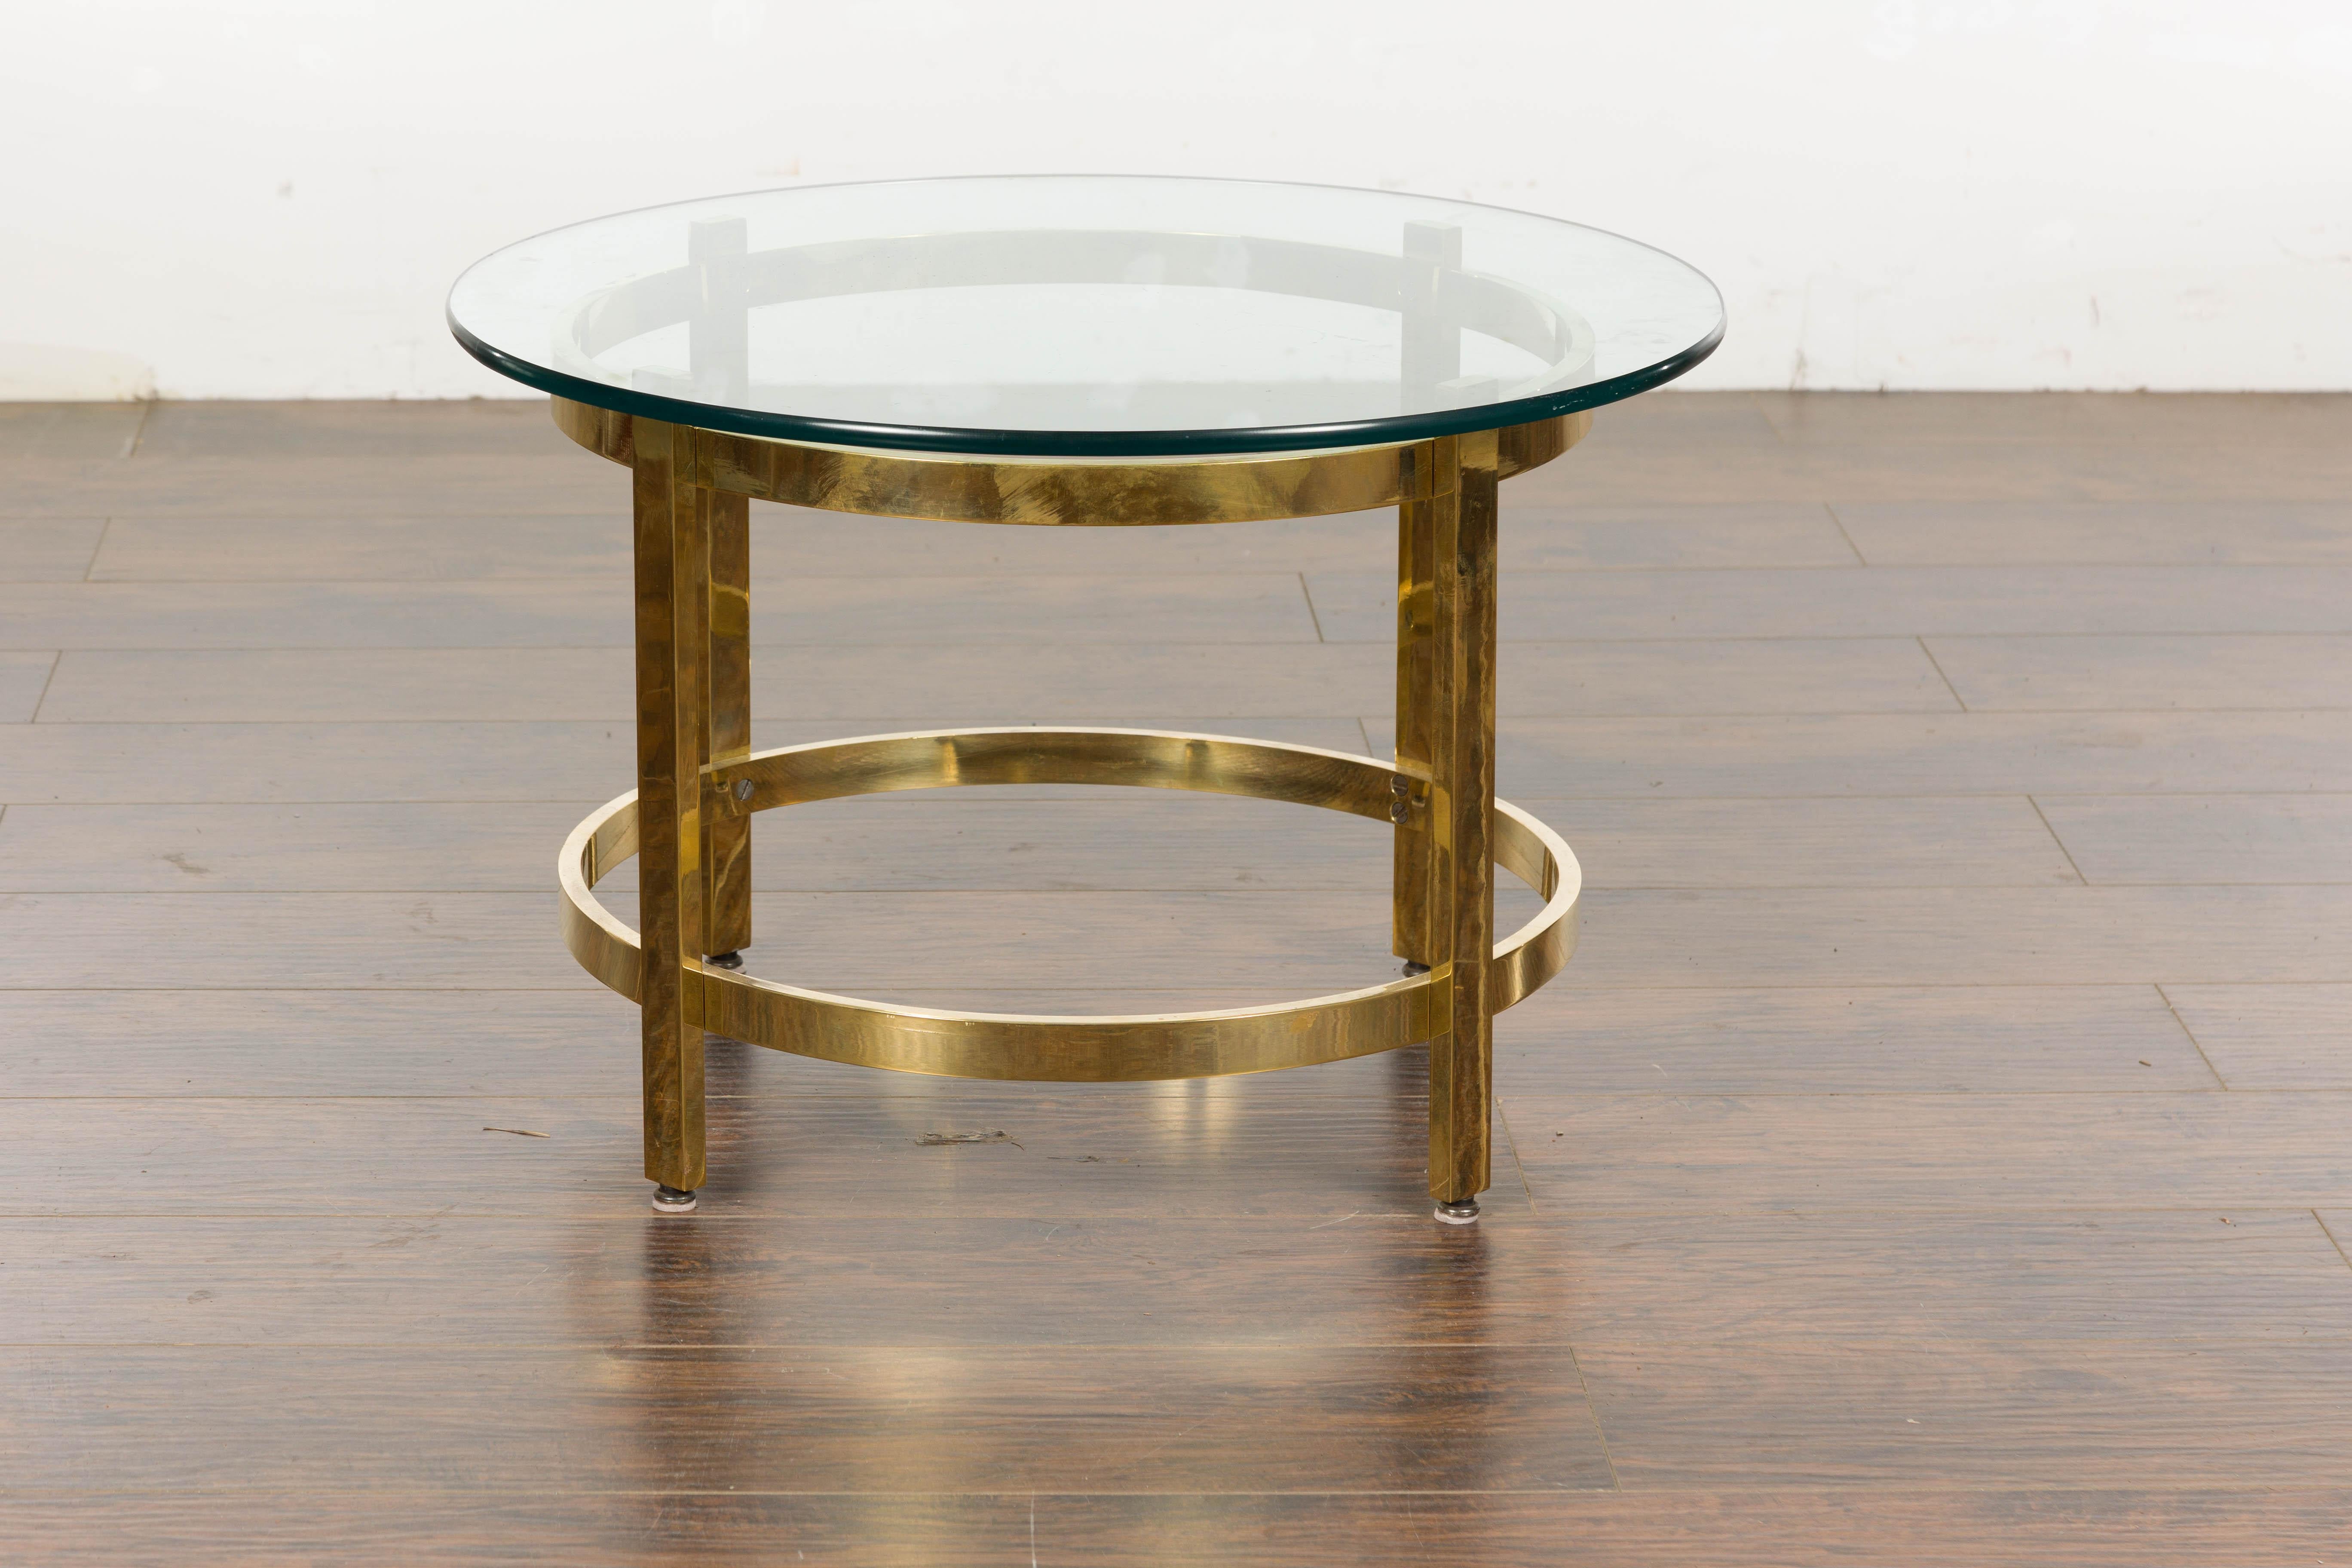 1950s Midcentury Italian Brass Side Table with Round Glass Top For Sale 2